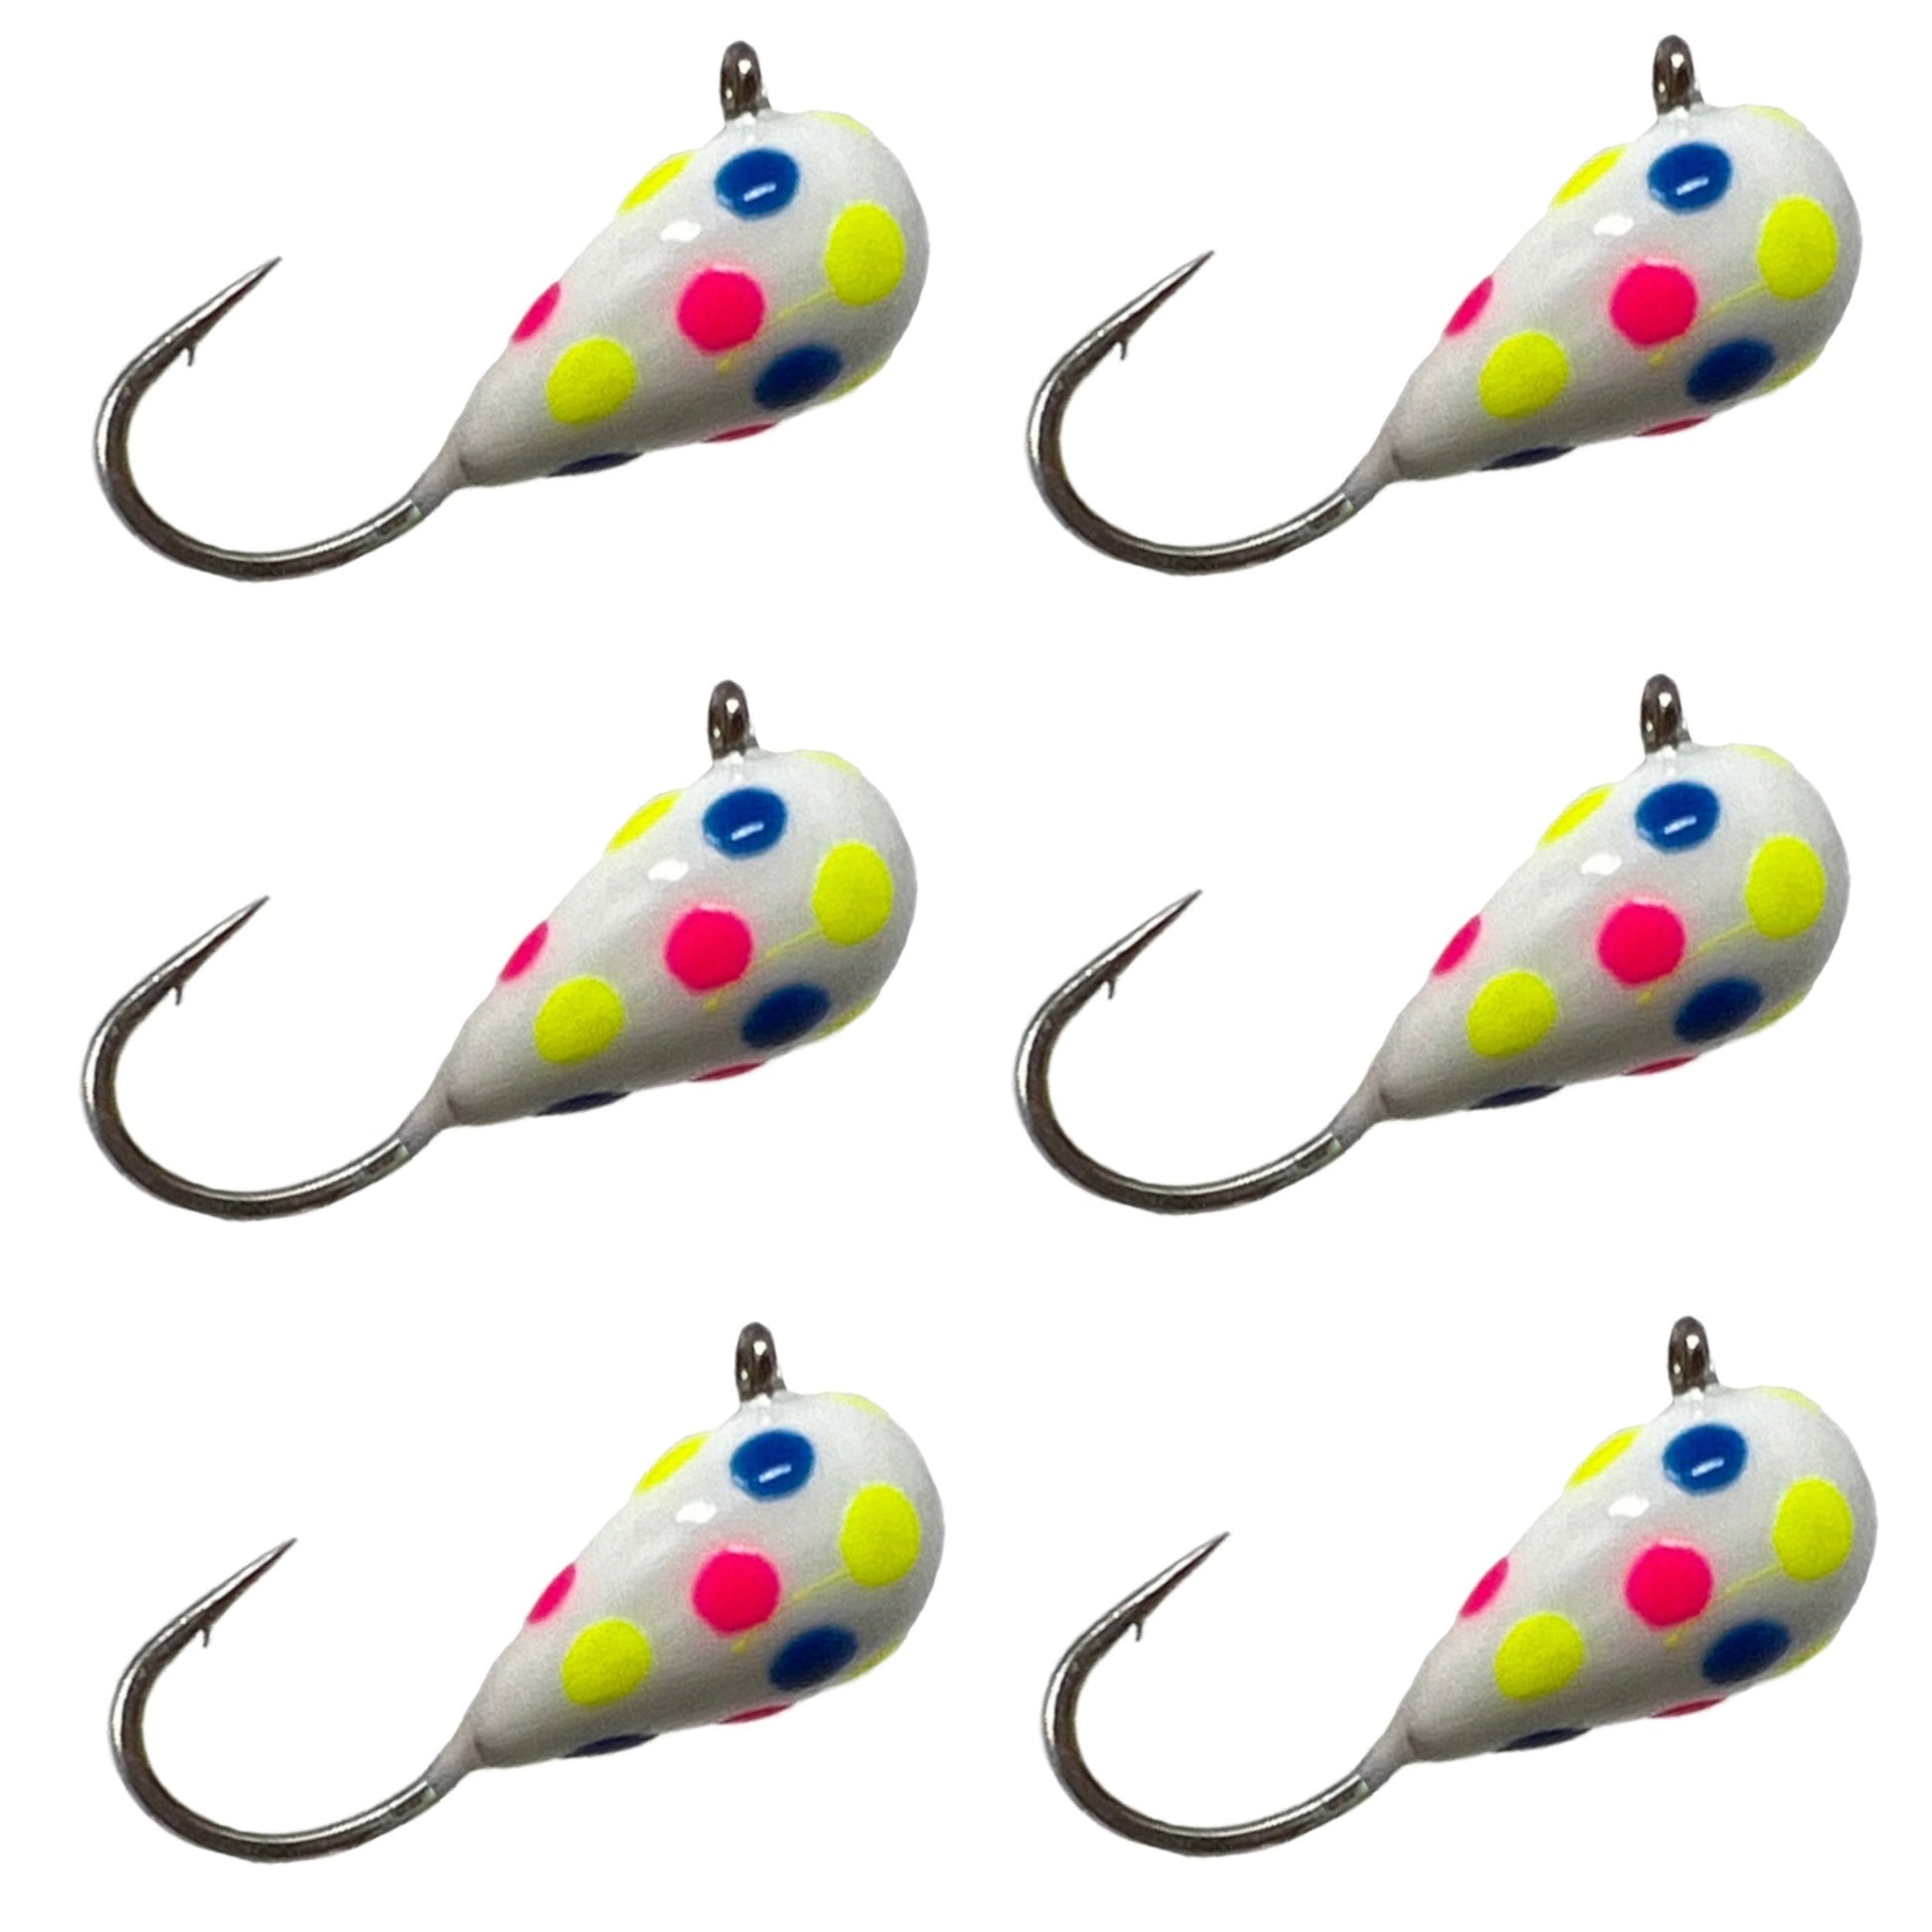 12Pcs Winter Ice Fishing Lure ice jigs for Crappie Bass Panfish 1.2g-2.6g  Artificial